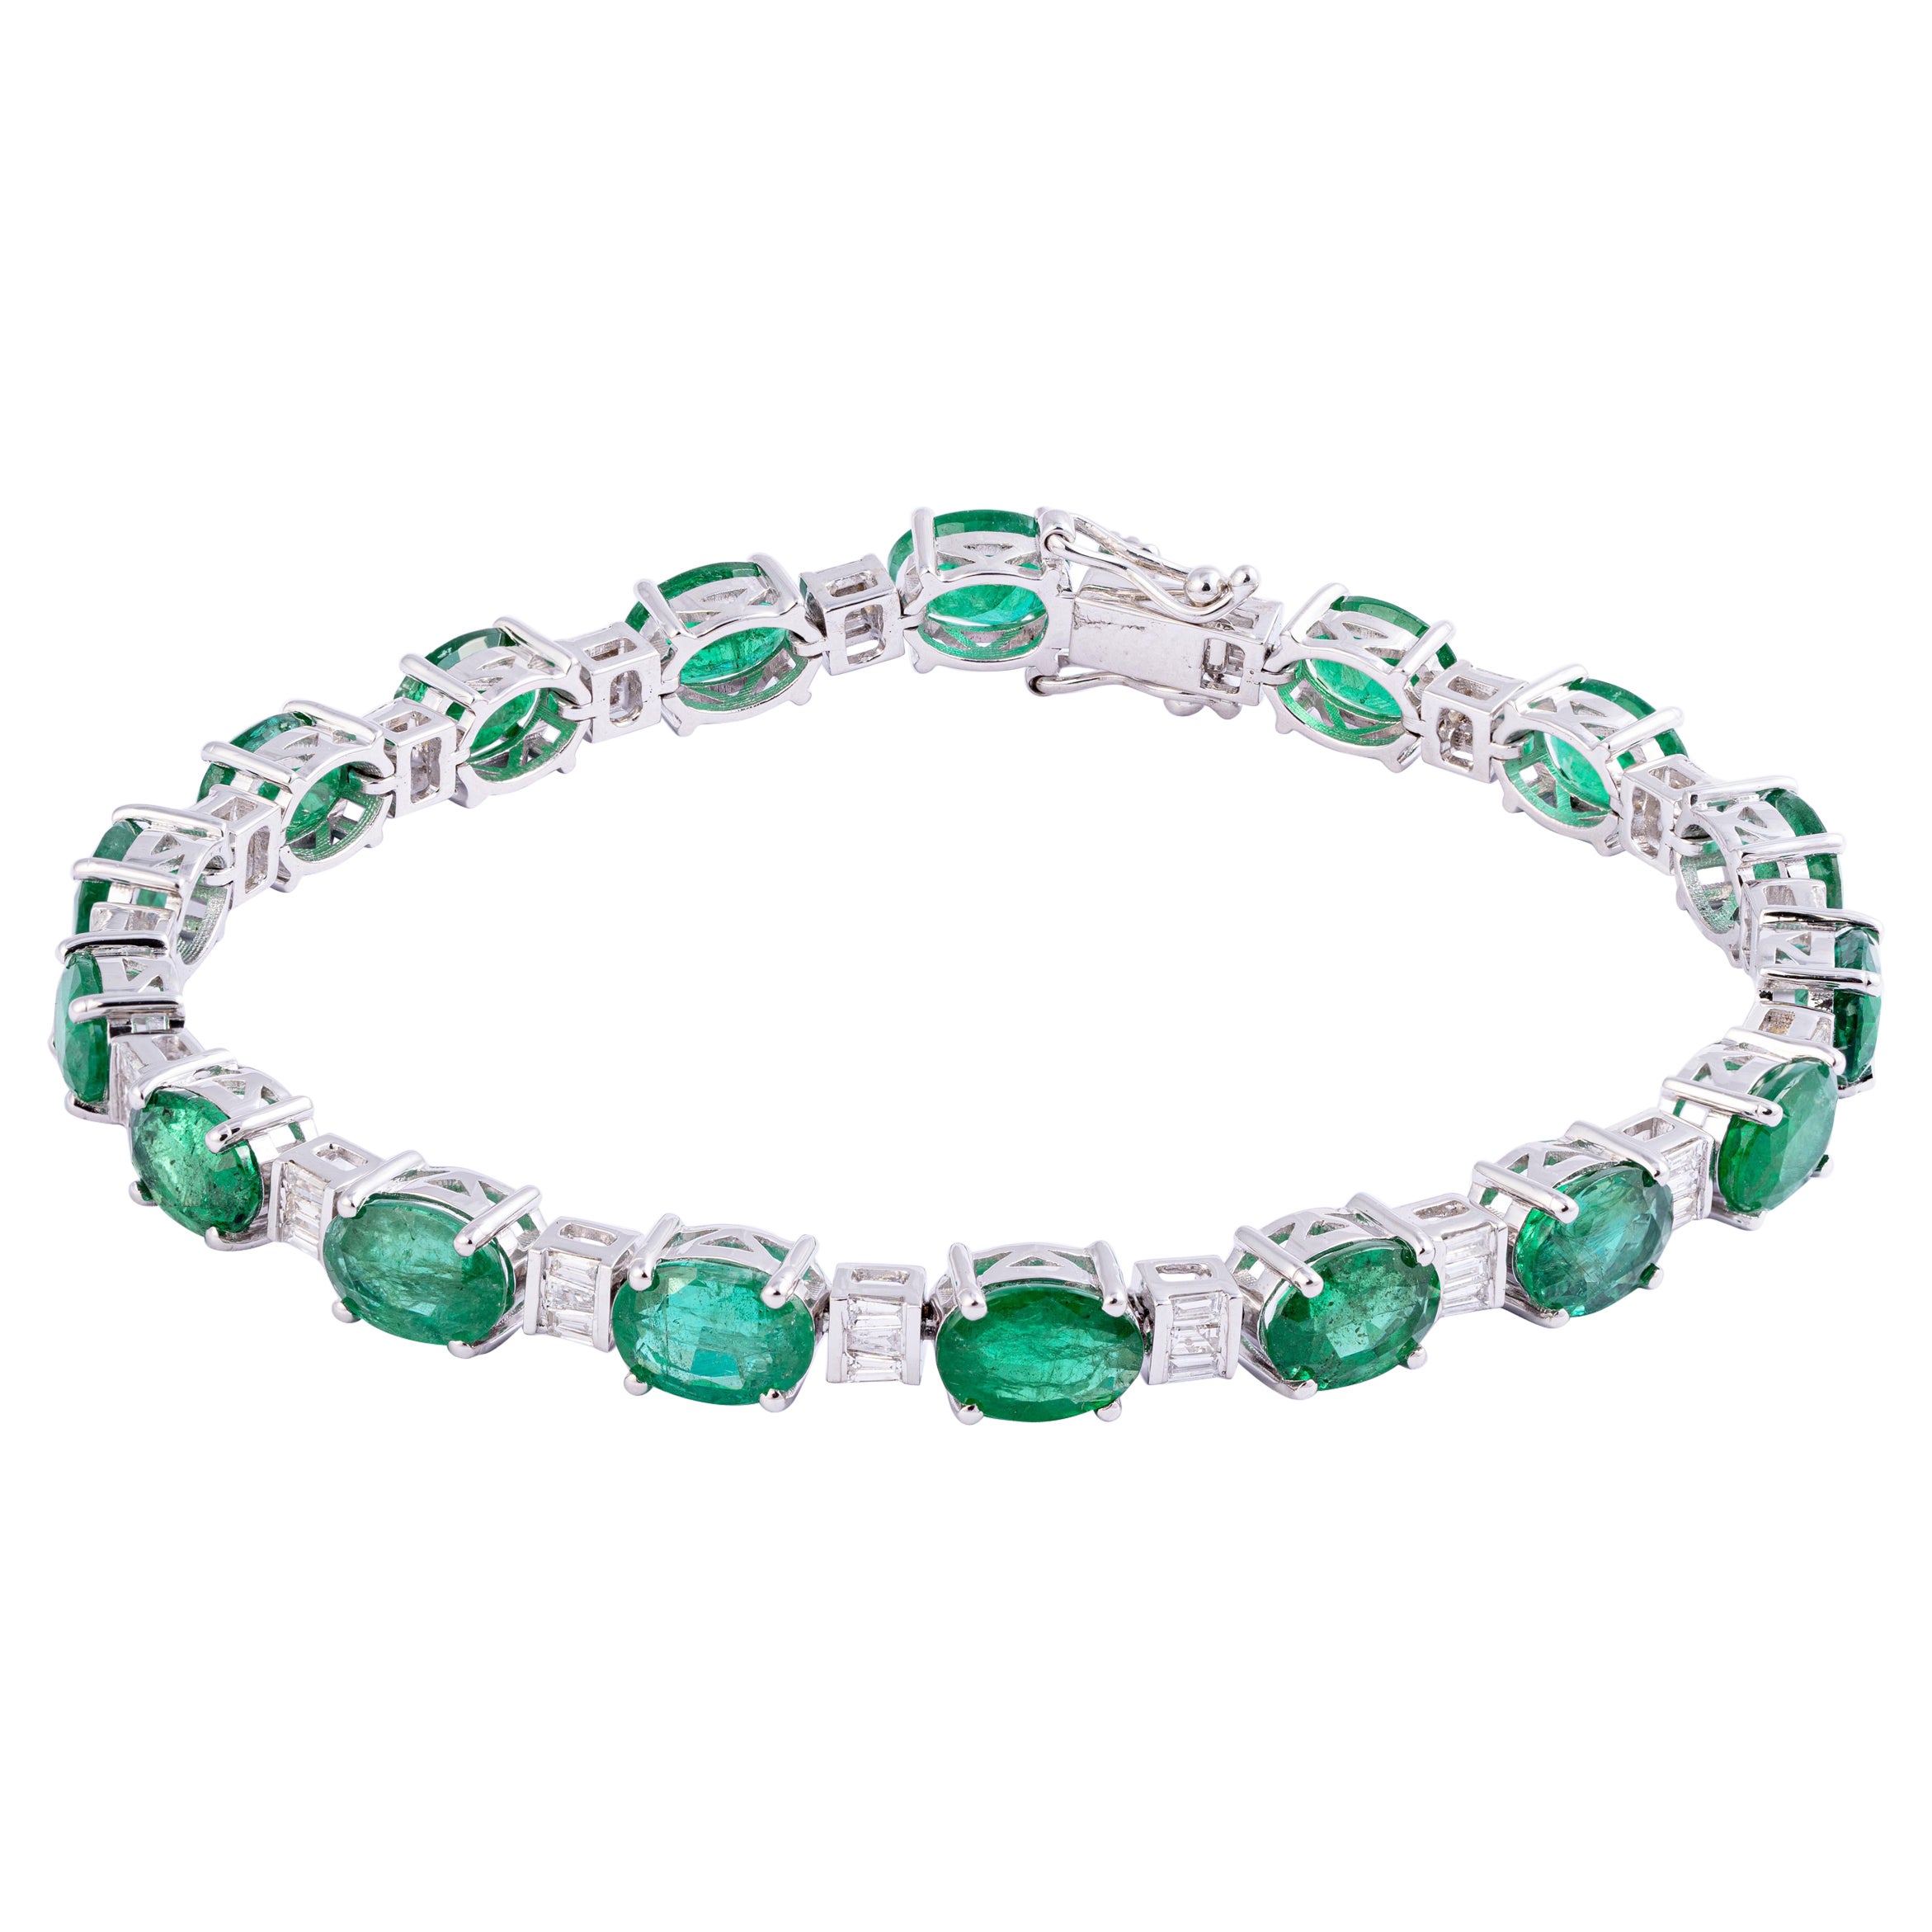  Zambian Emerald 13.06cts Tennis Bracelet with Diamonds 0.74cts and 14k Gold For Sale